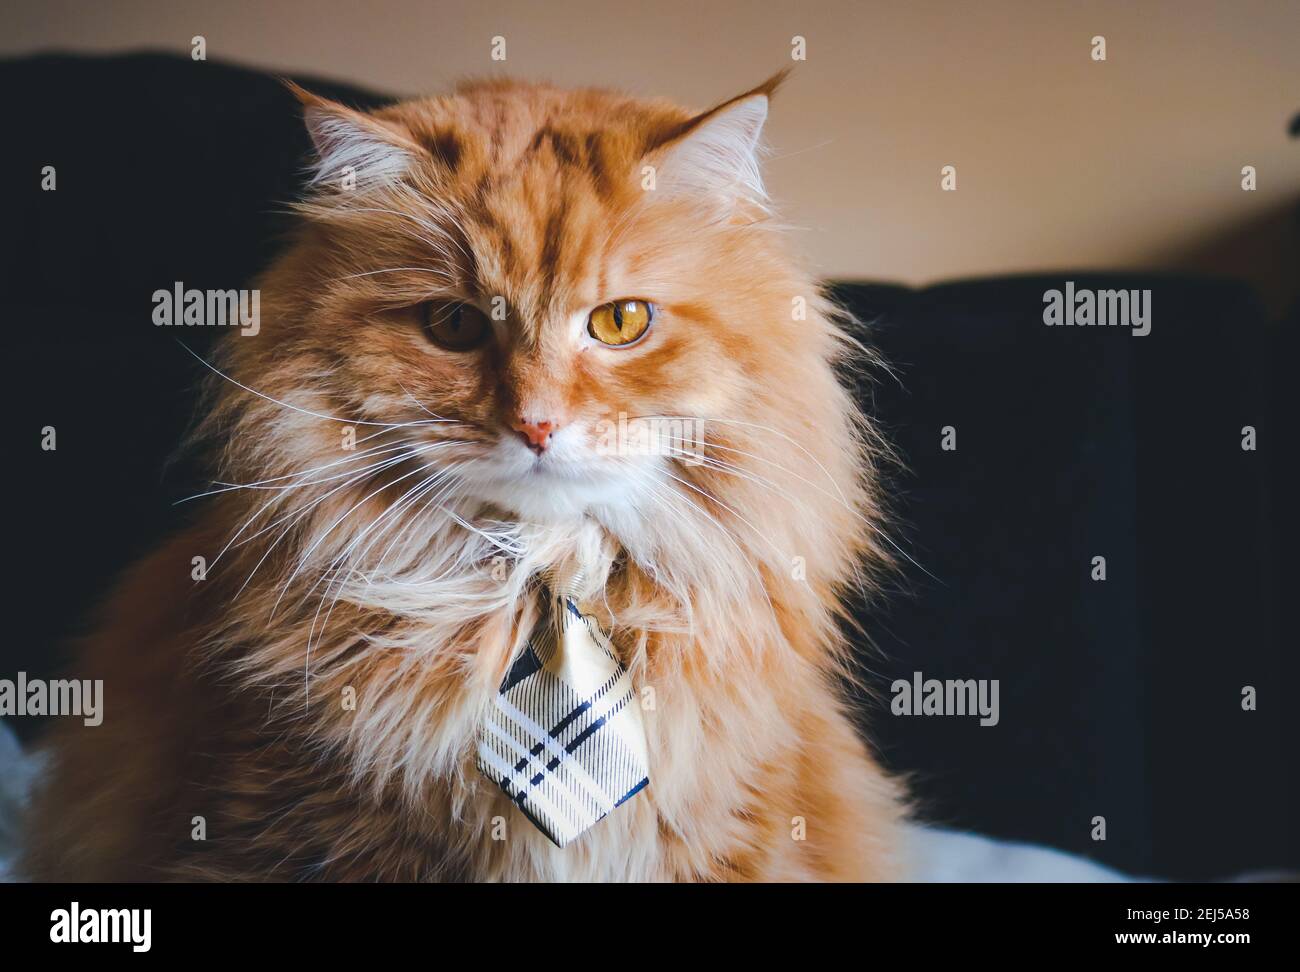 Fluffy ginger cat with bow tie Stock Photo